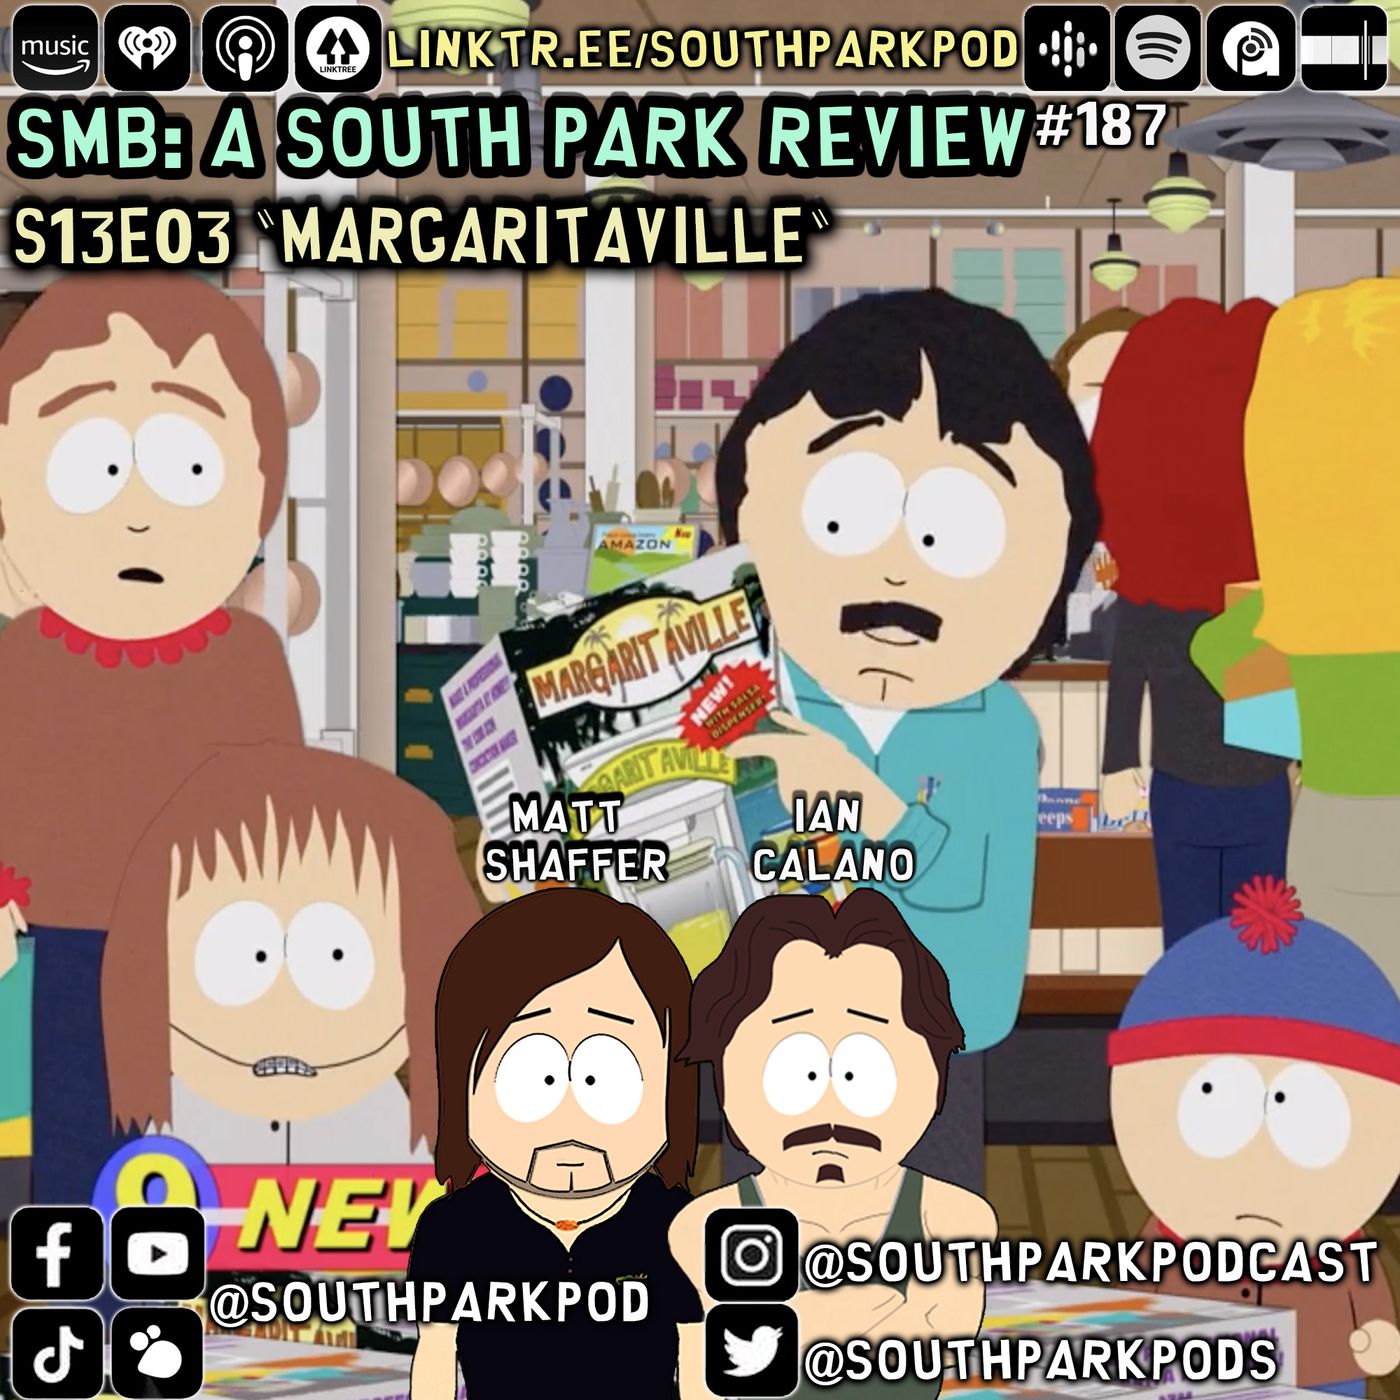 SMB #187 - S13E3 Margaritaville - ”And...Its Gone!”